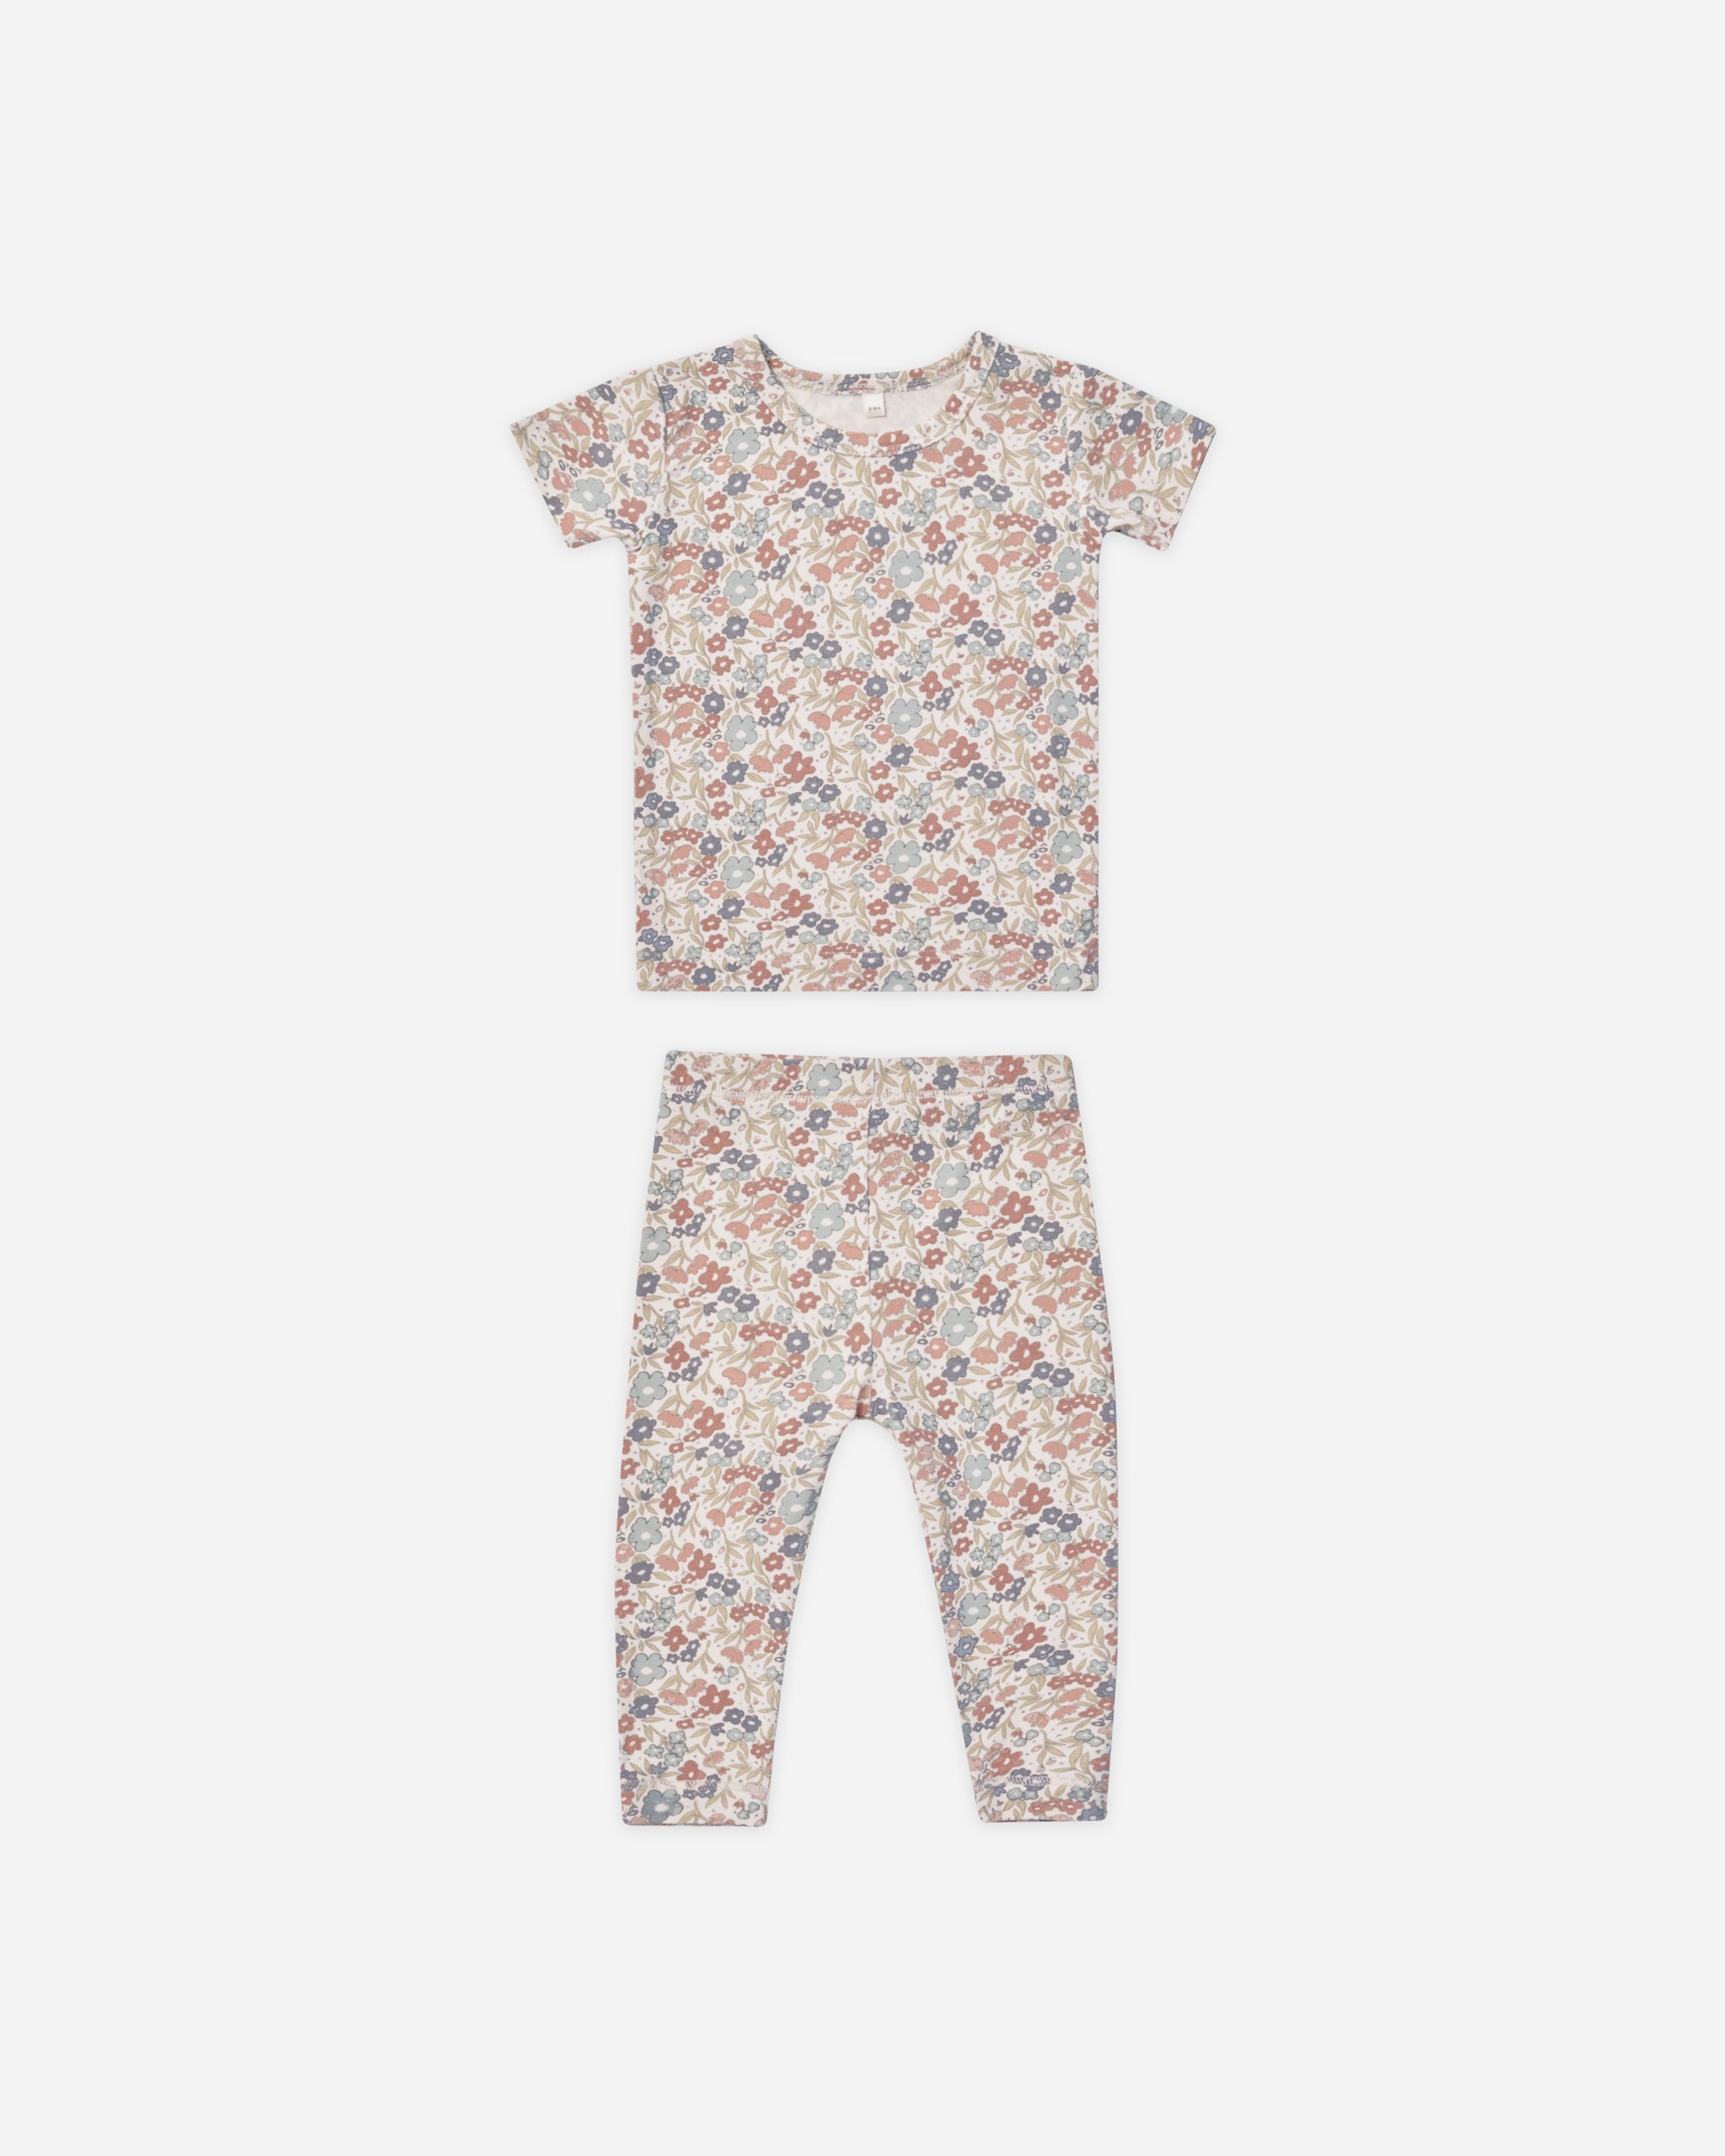 Bamboo Short Sleeve Pajama Set || Bloom - Rylee + Cru | Kids Clothes | Trendy Baby Clothes | Modern Infant Outfits |